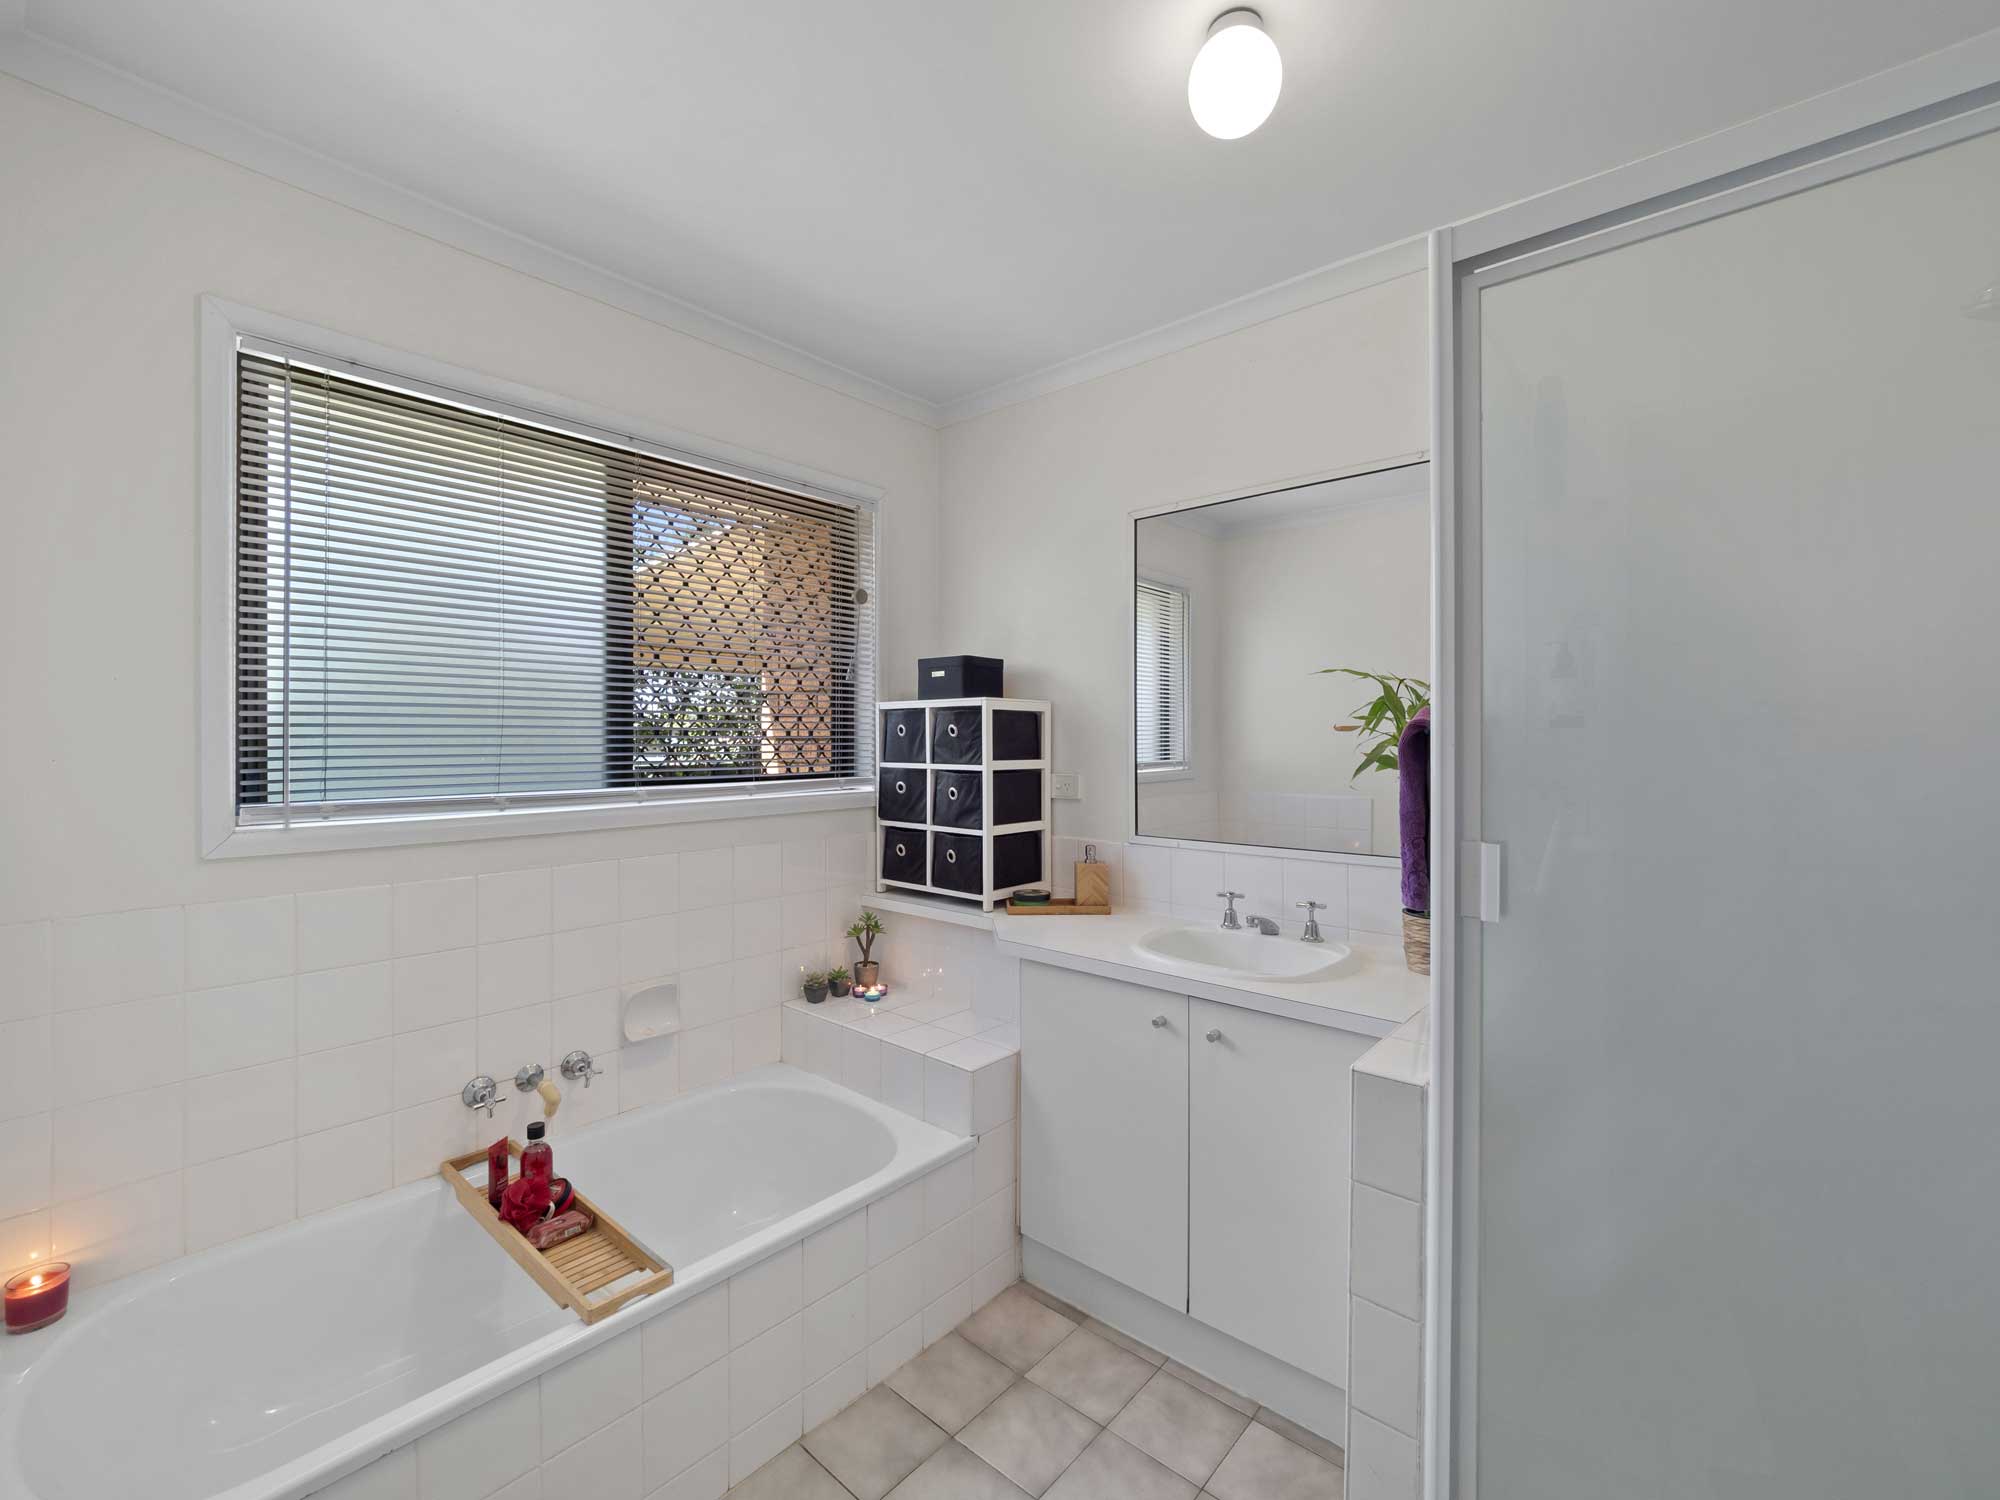 Capturing the ensuite of the home for sale at Mitchelton